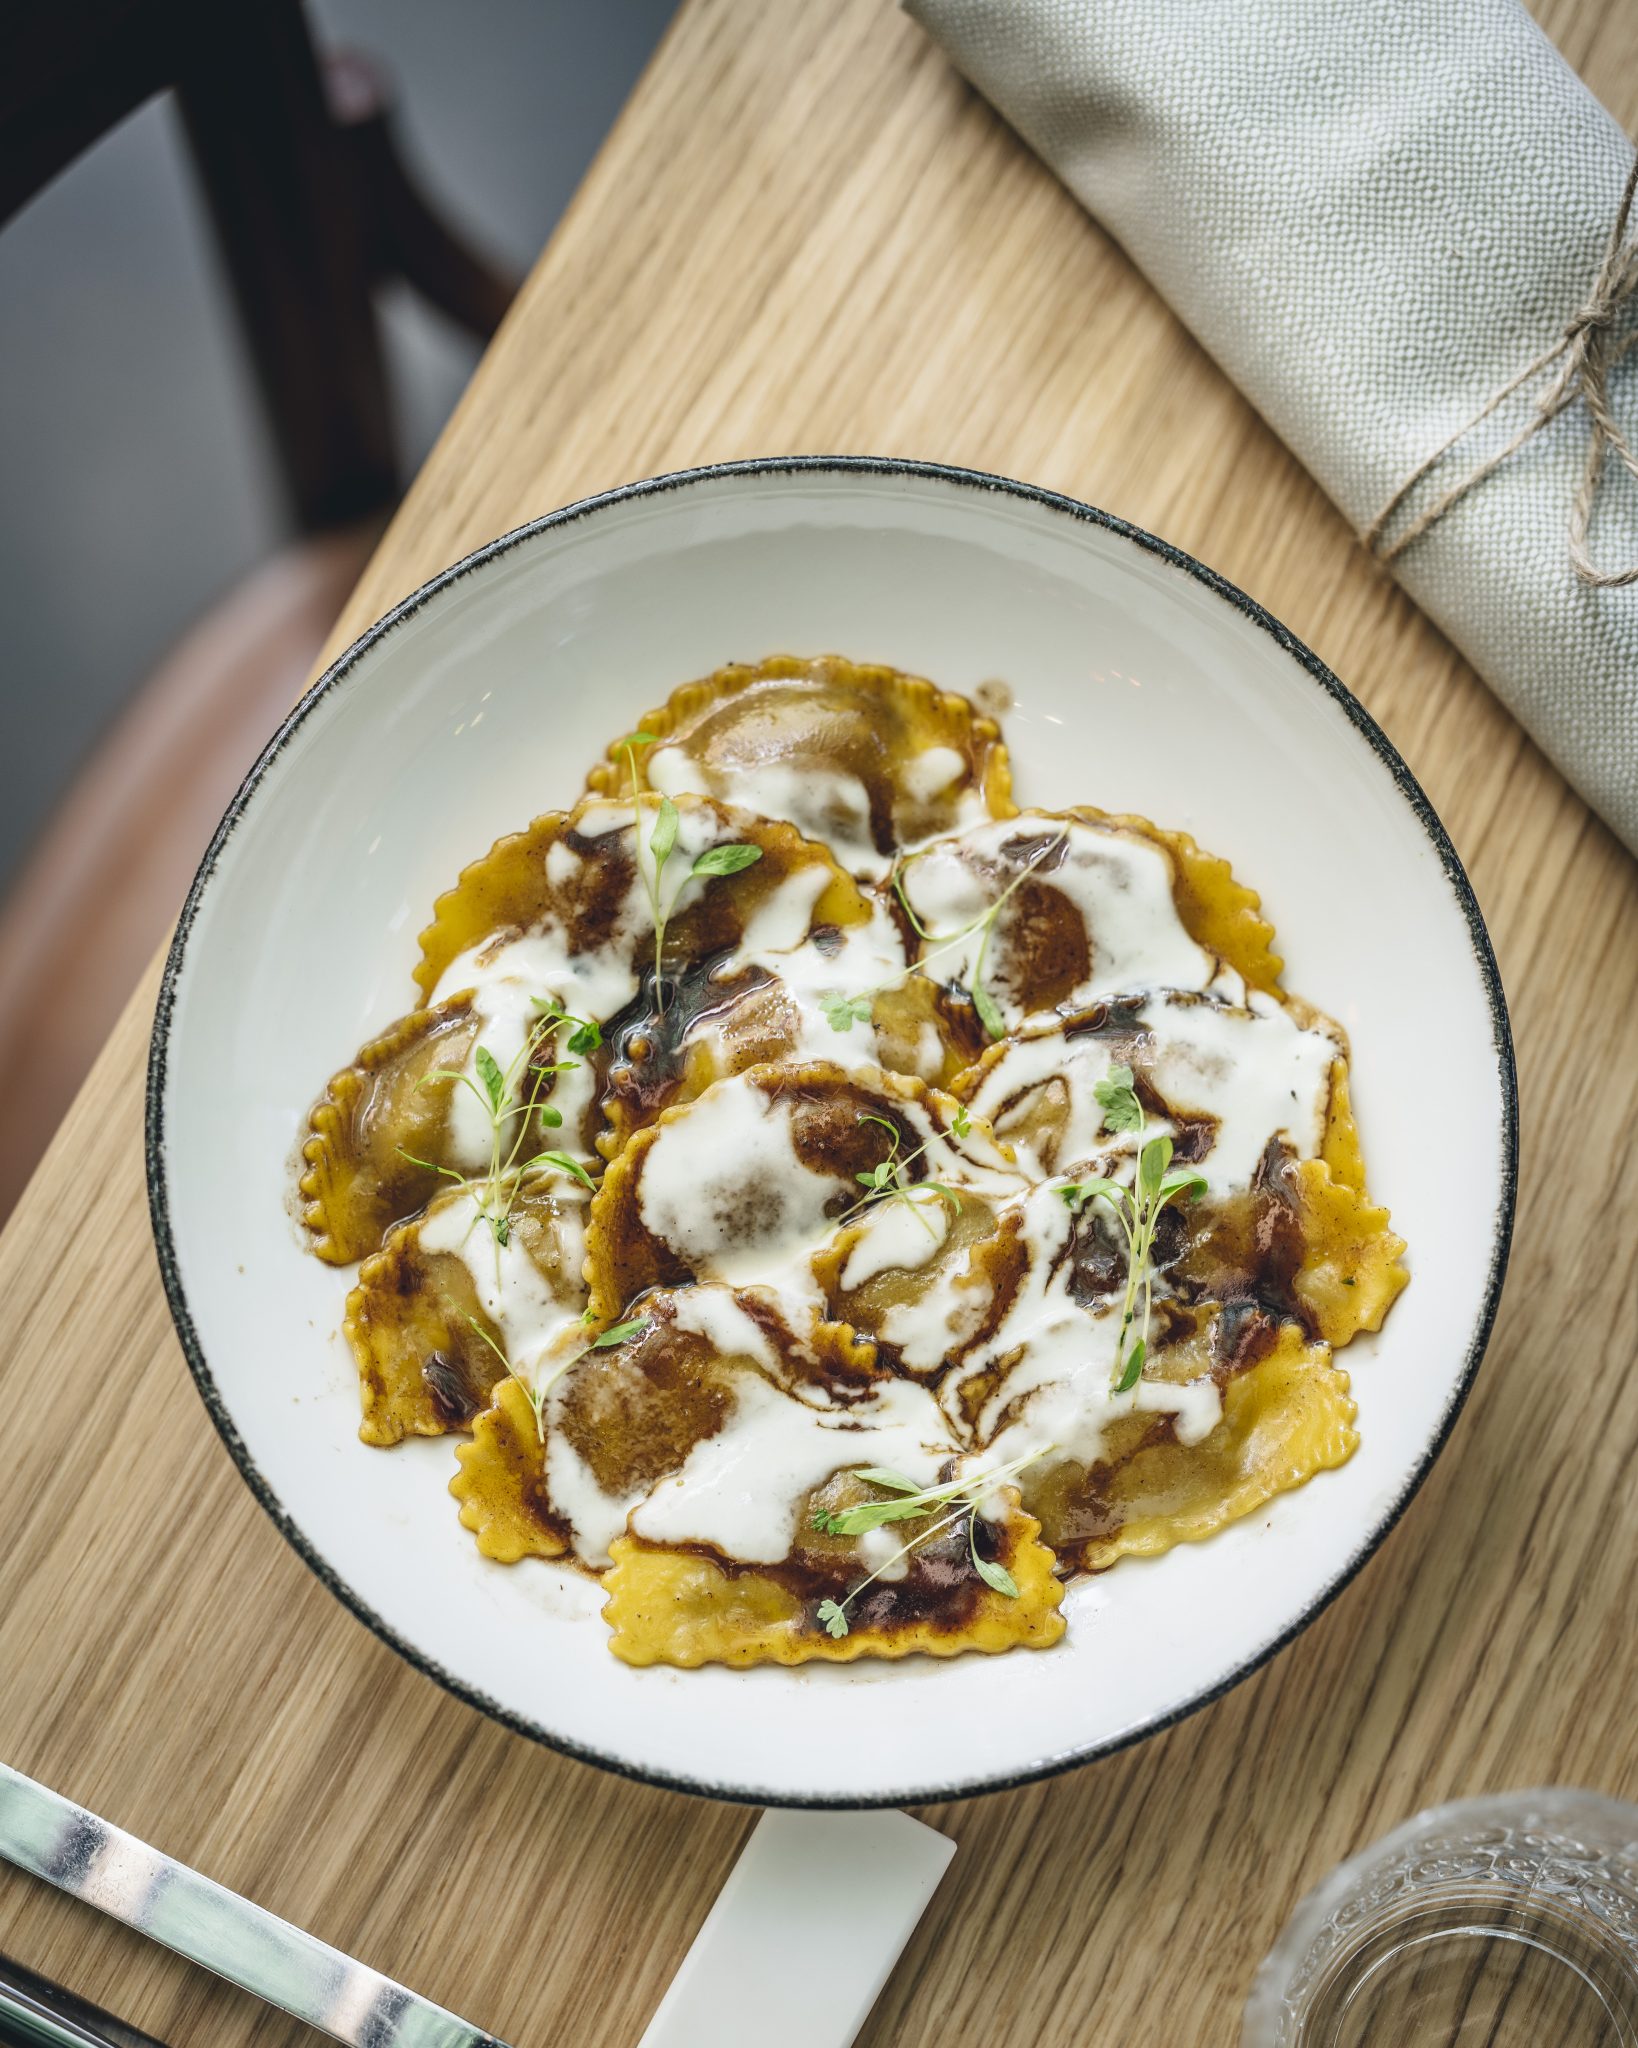 Terra Eataly London Review Slow braised oxtail ravioli |  Photo: @ lateef.photography